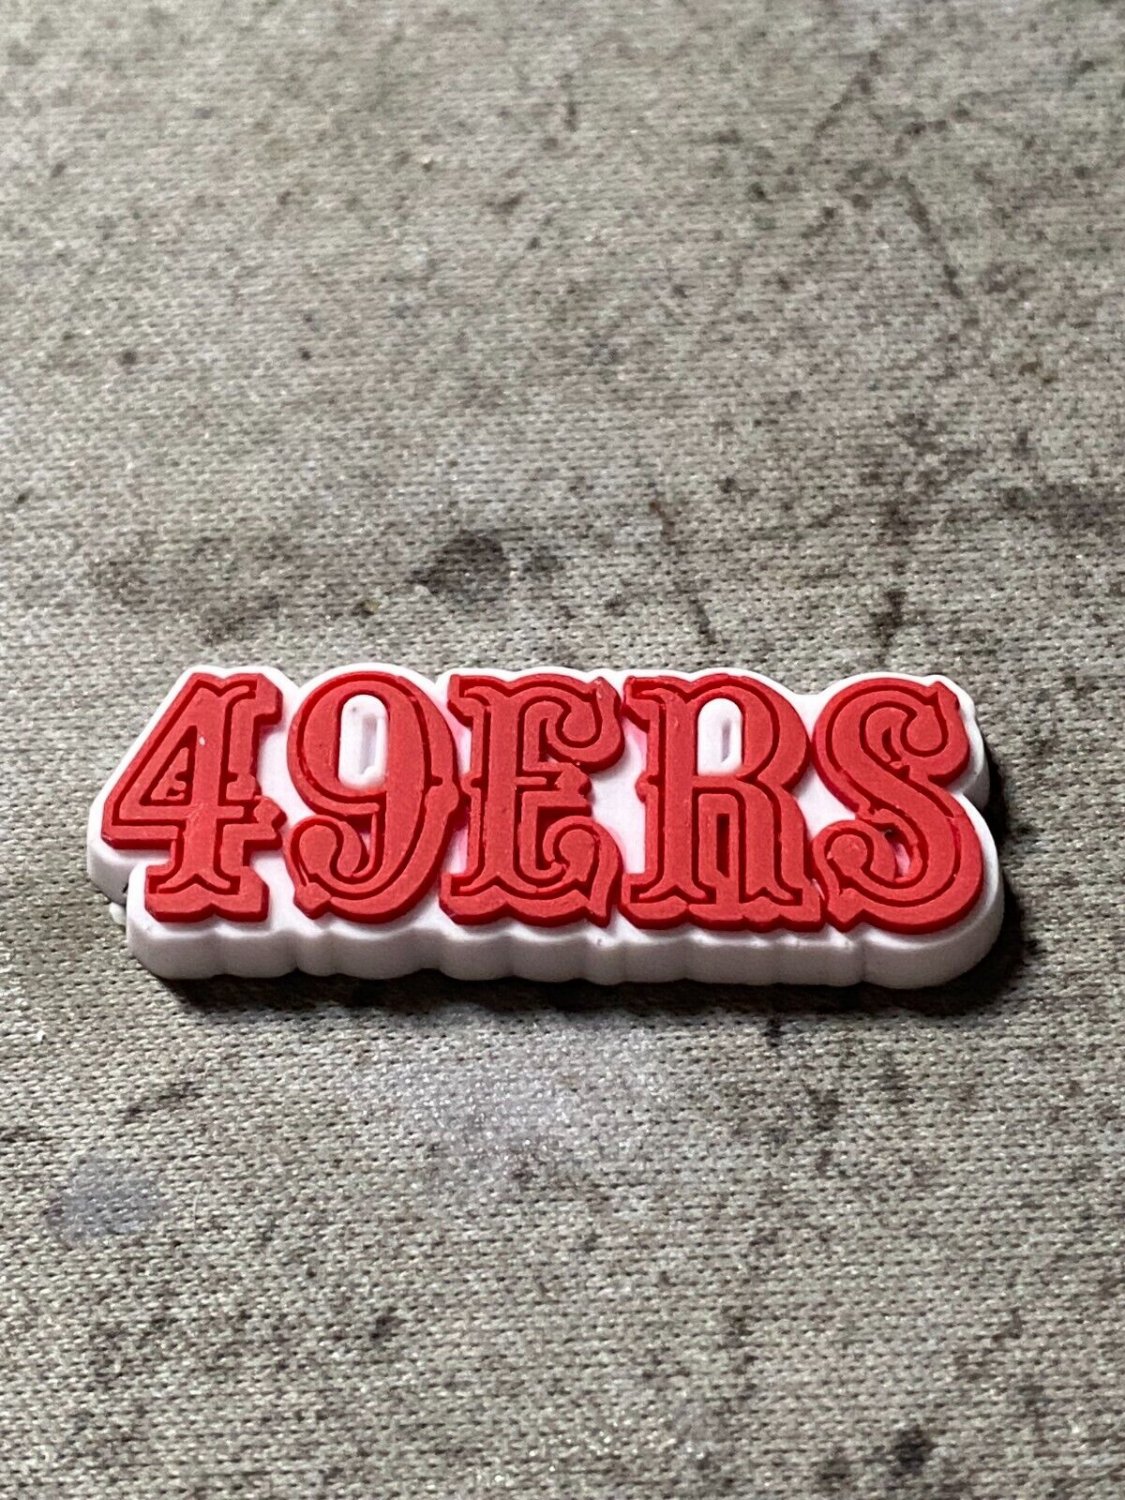 San Francisco 49ers croc charms (no back buttons) DIY projects 10pk